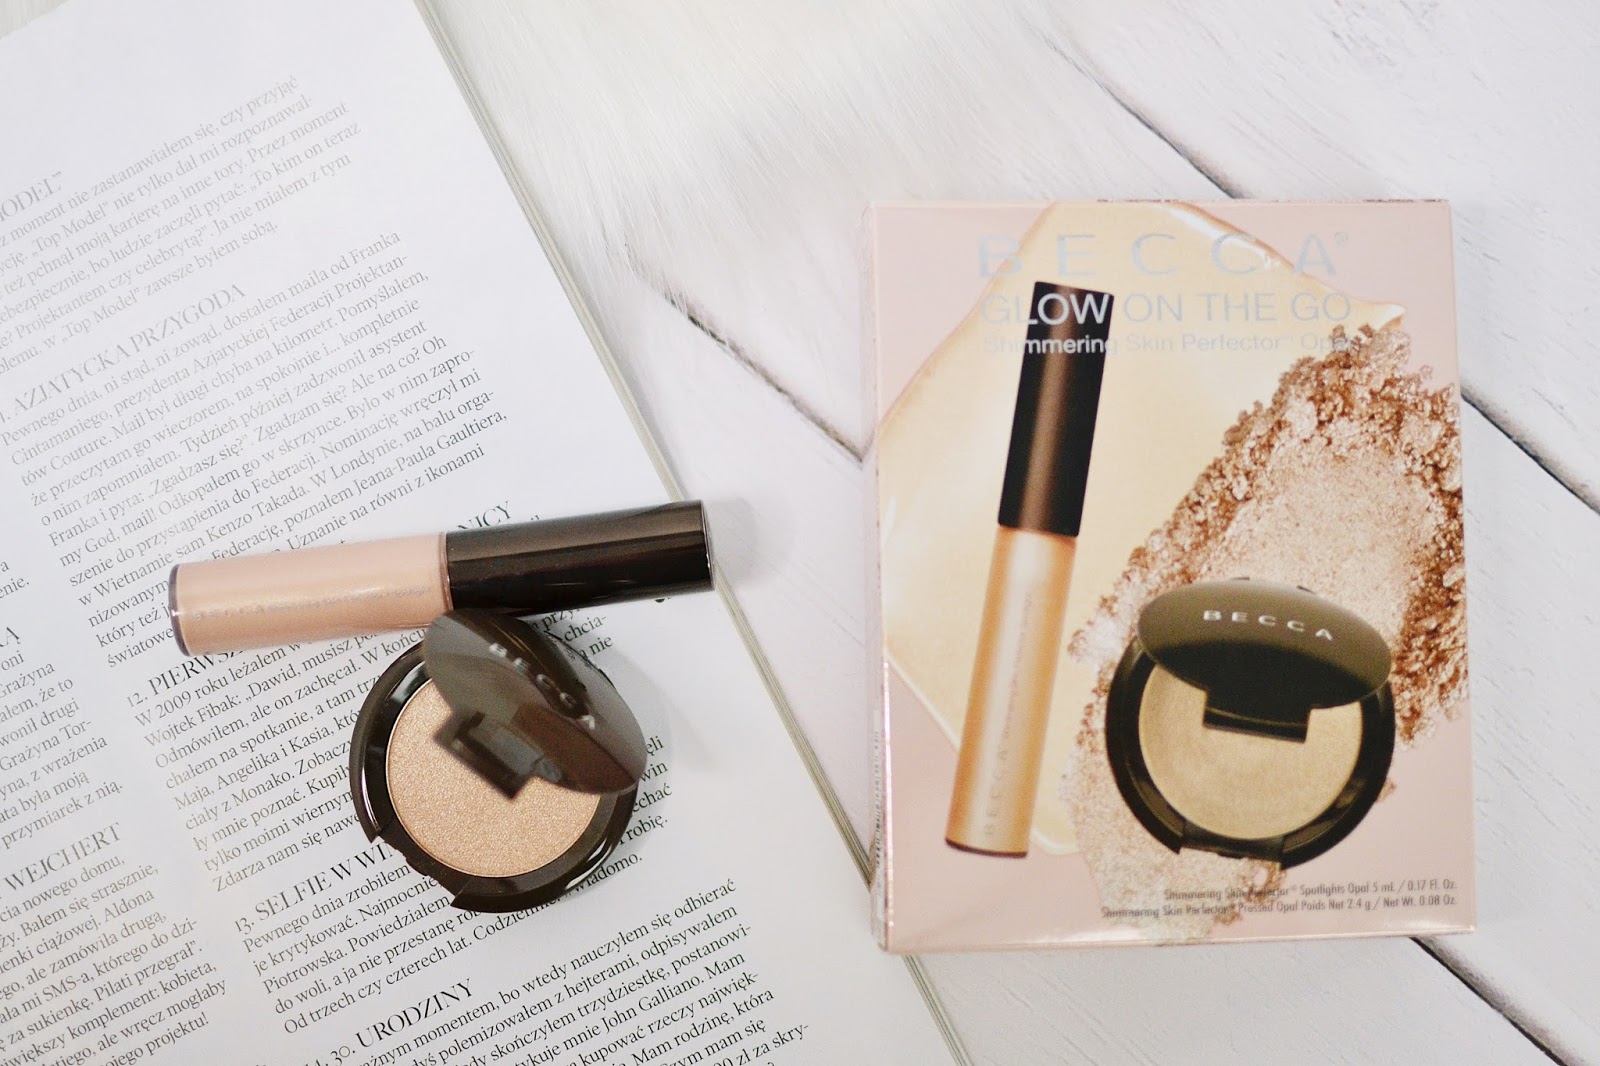 BECCA SHIMMERING SKIN PERFECTOR